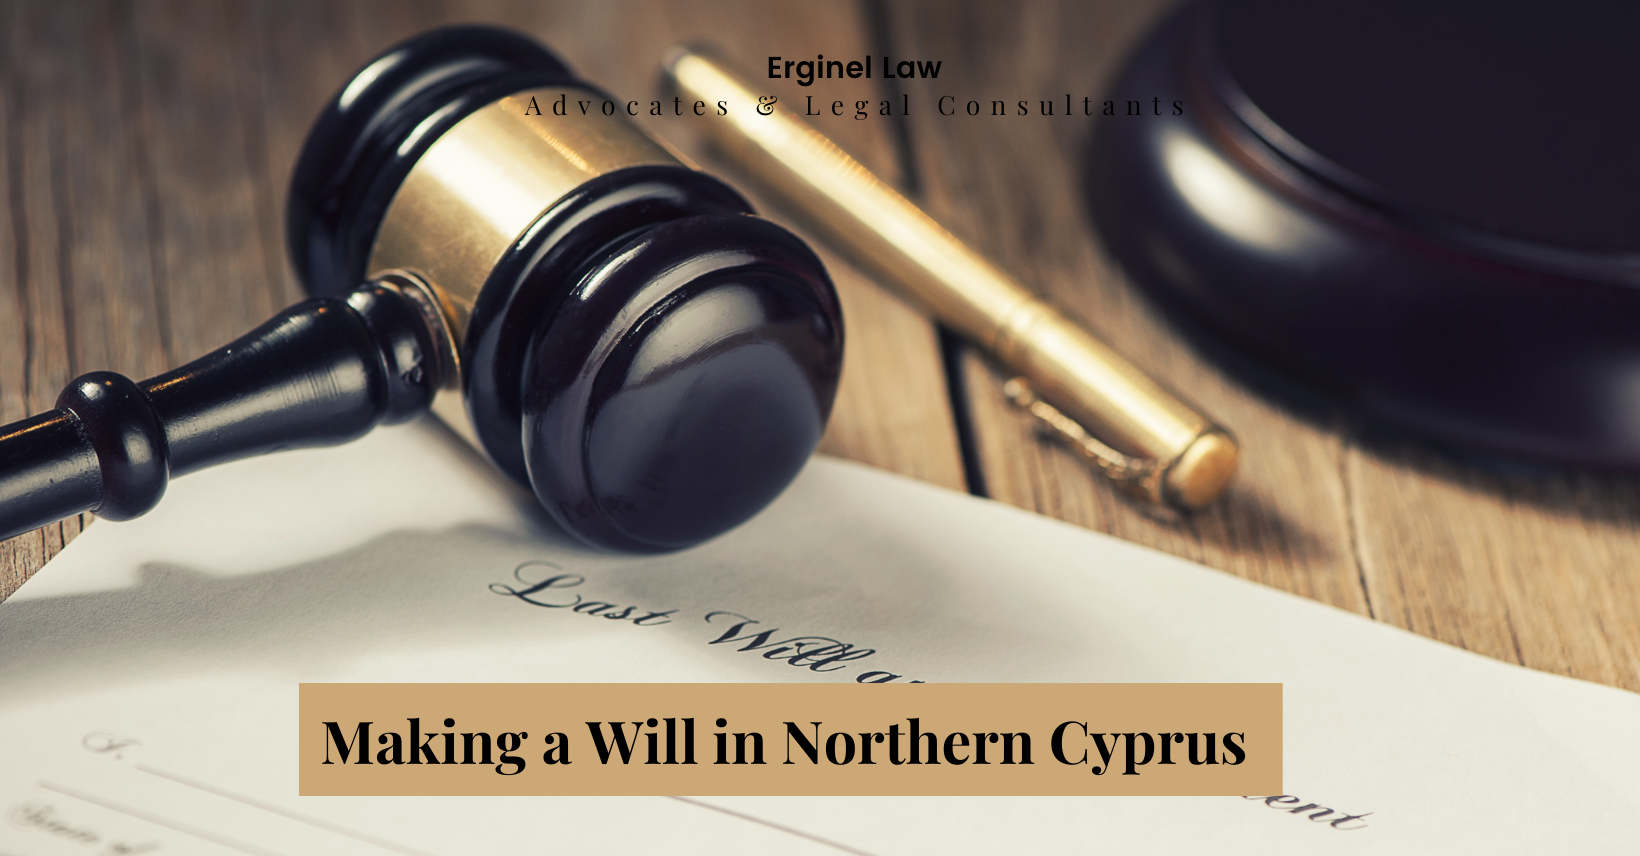 a will in trnc - lawyers about making a will